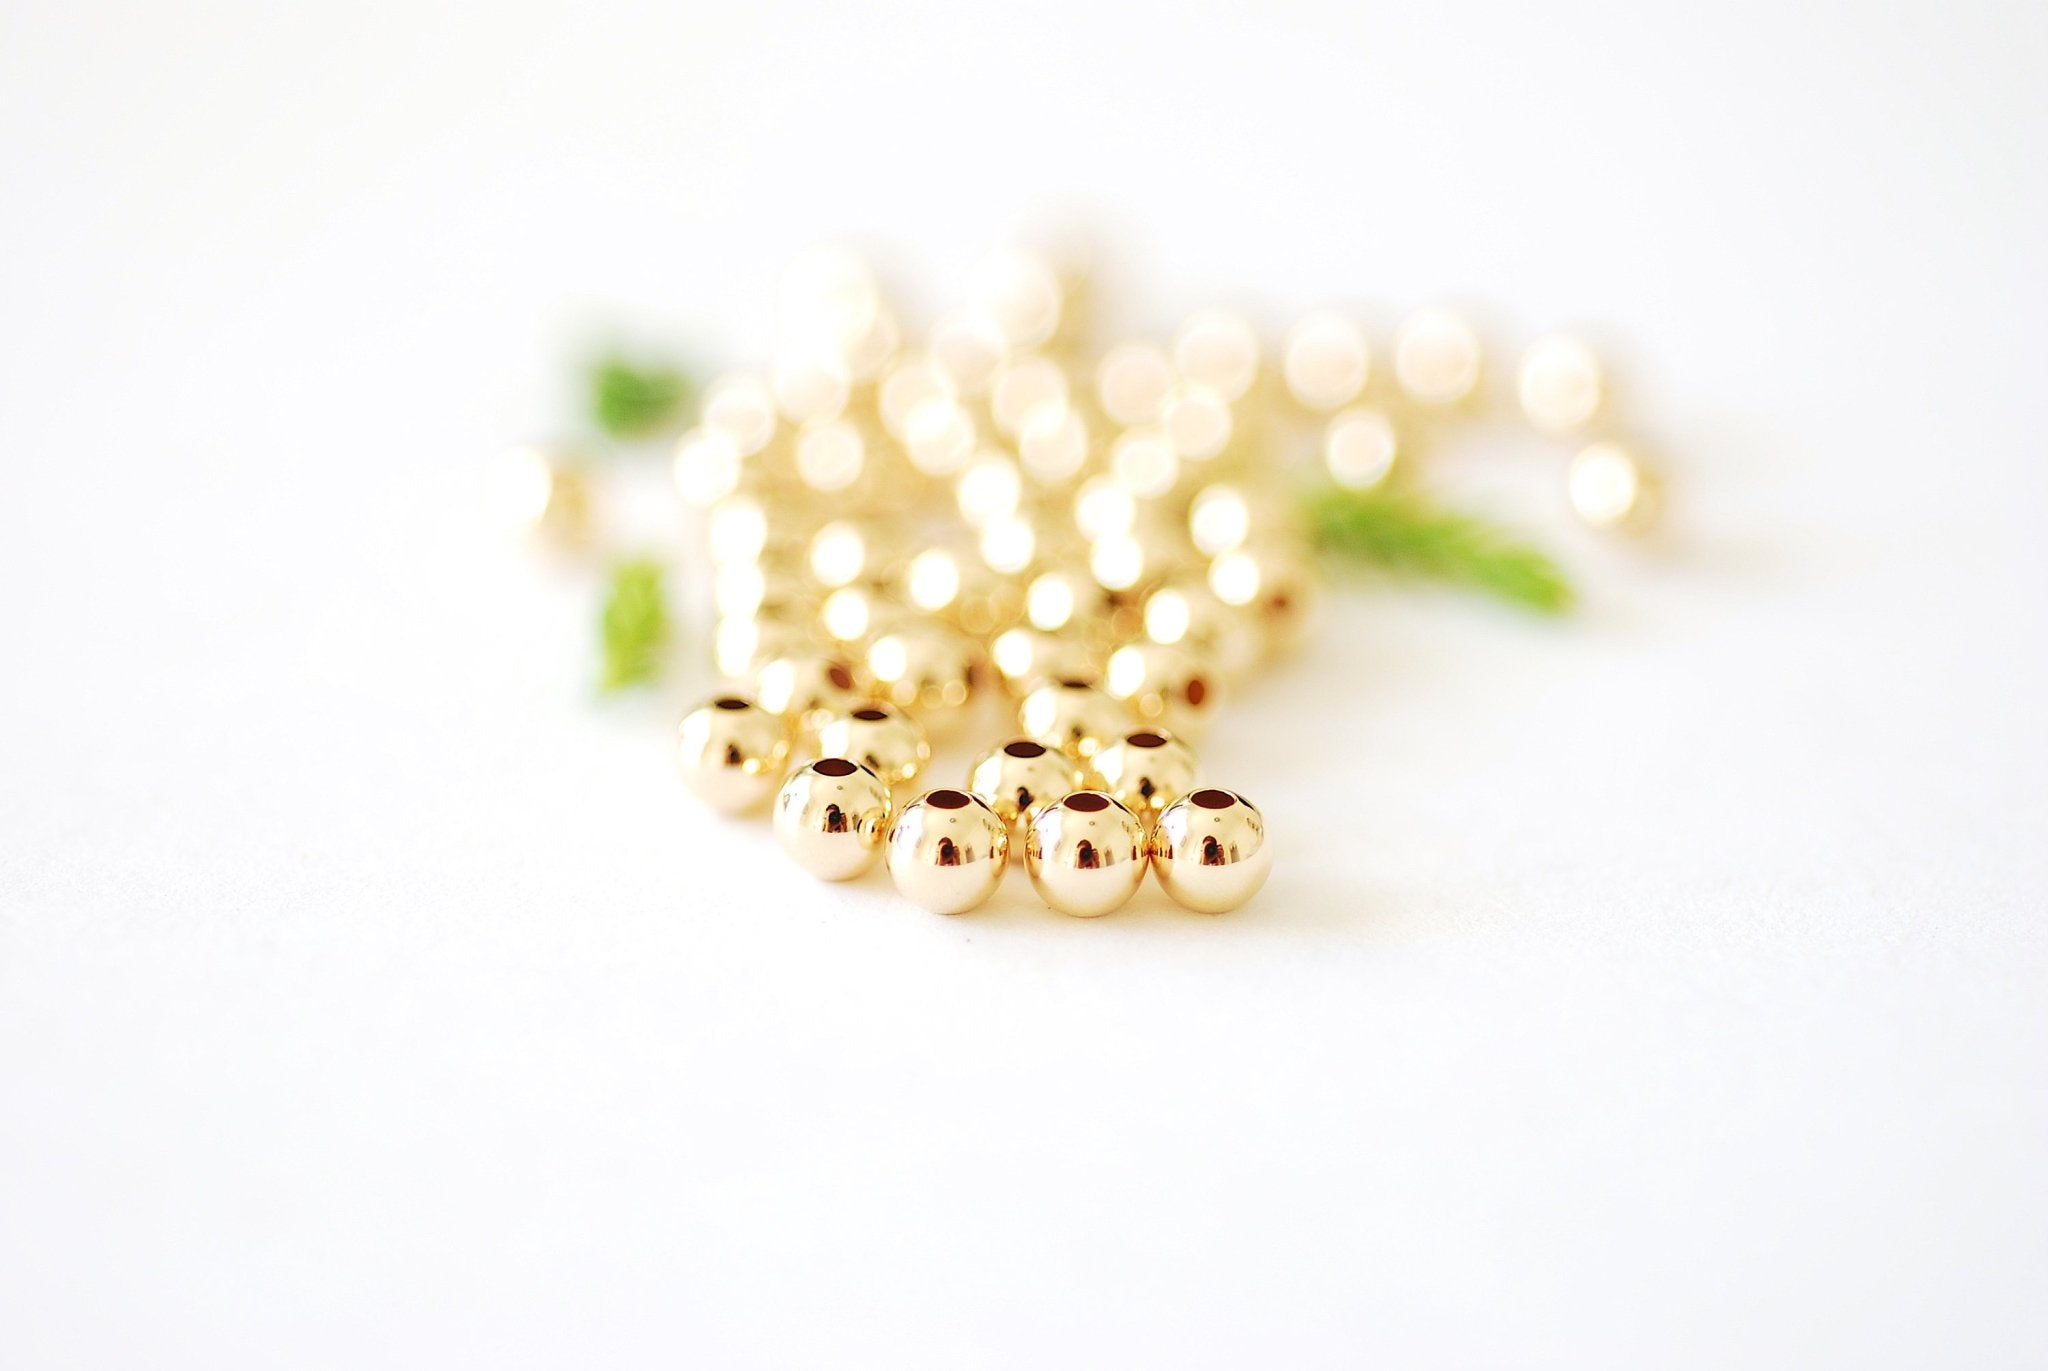 25 pcs Gold Filled 3mm 4mm 5mm Round Beads 1.5mm hole spacer Beads Seamless Round Beads Beaded Bracelet Jewelry Making - HarperCrown